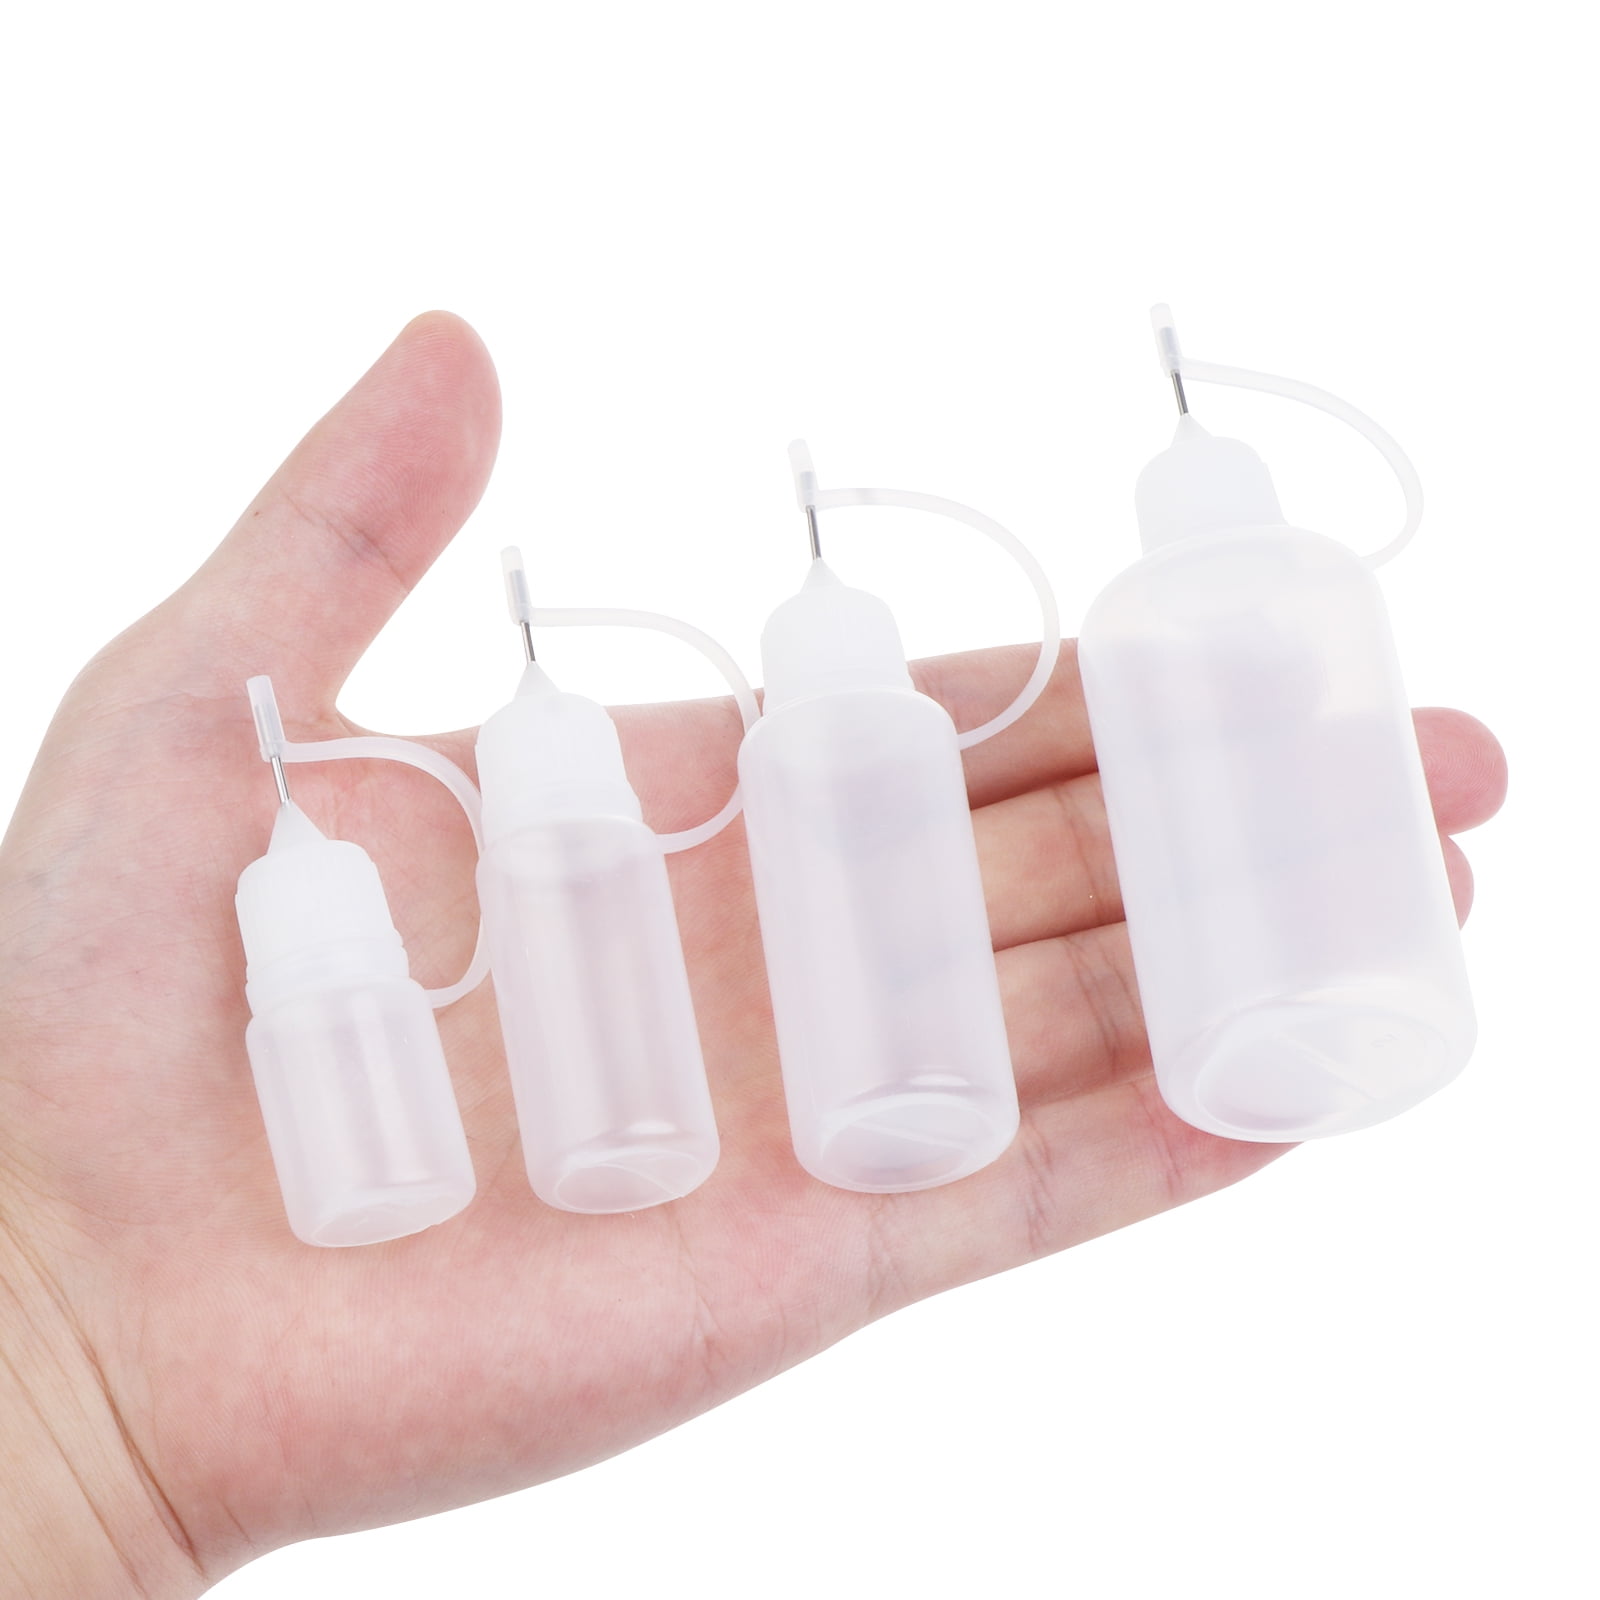  LALAFINA 72 Pcs Long Needle Oil Injection Bottle The Needle  Precision Stainless Steel : Arts, Crafts & Sewing